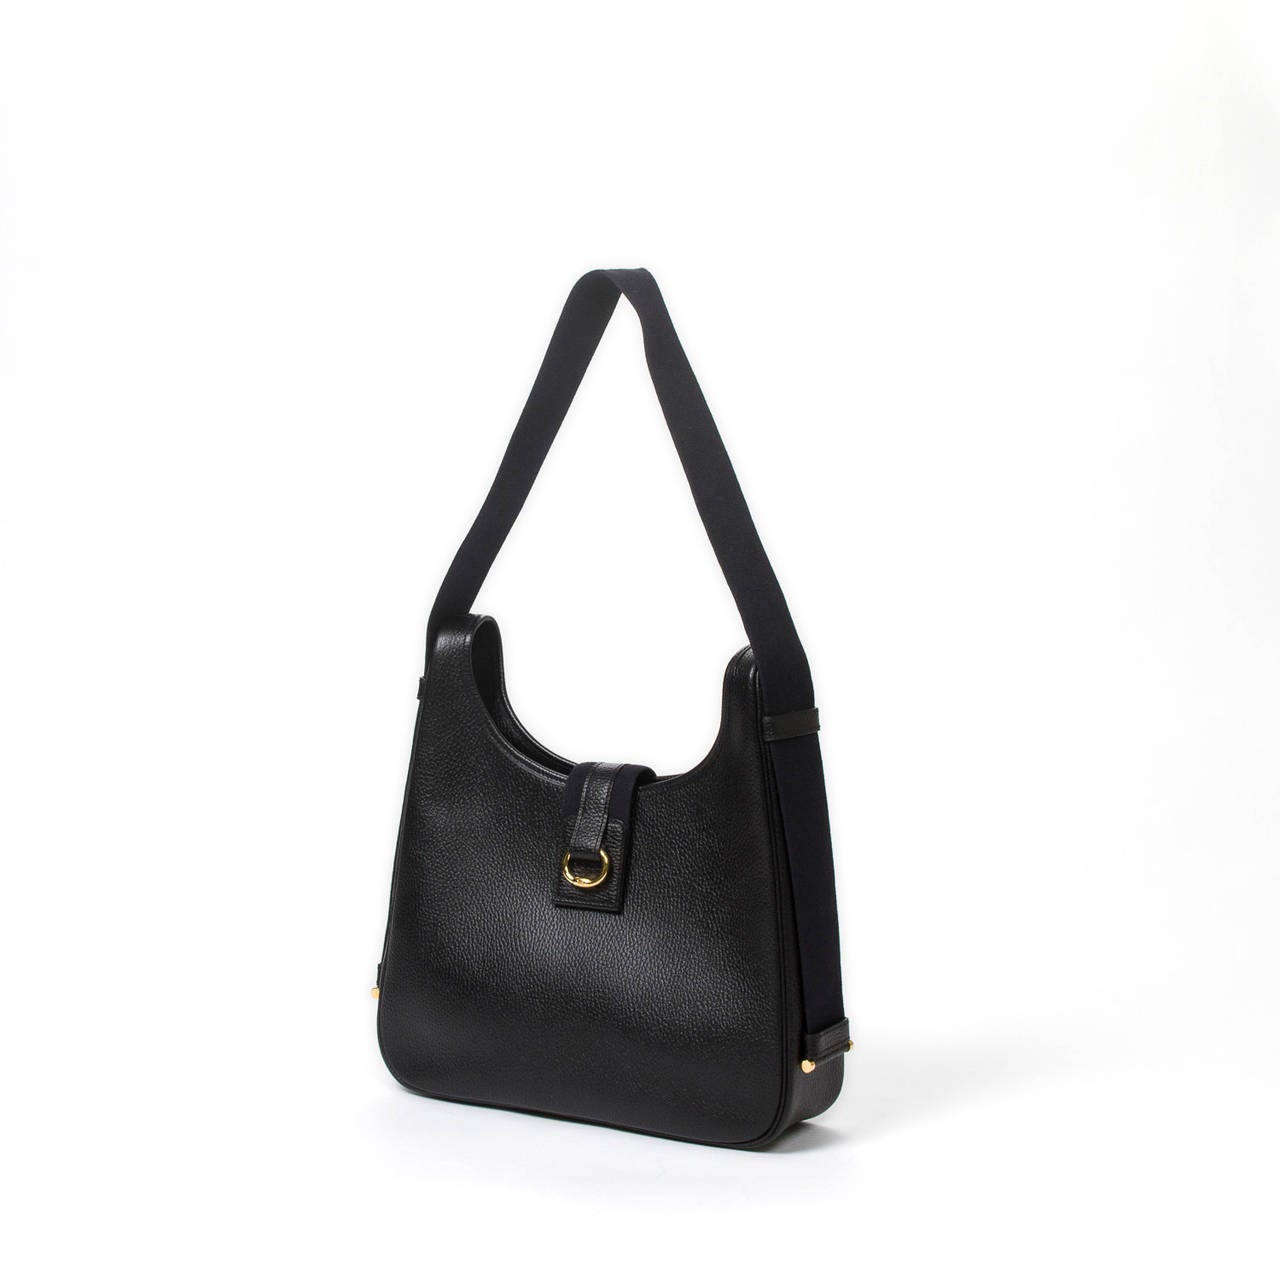 Tsako in black ardennes leather with gold tone hardware. Black leather interior with 2 pockets which one is zipped. Stamp F in square (2002). Dustbag included. Pristine condition.